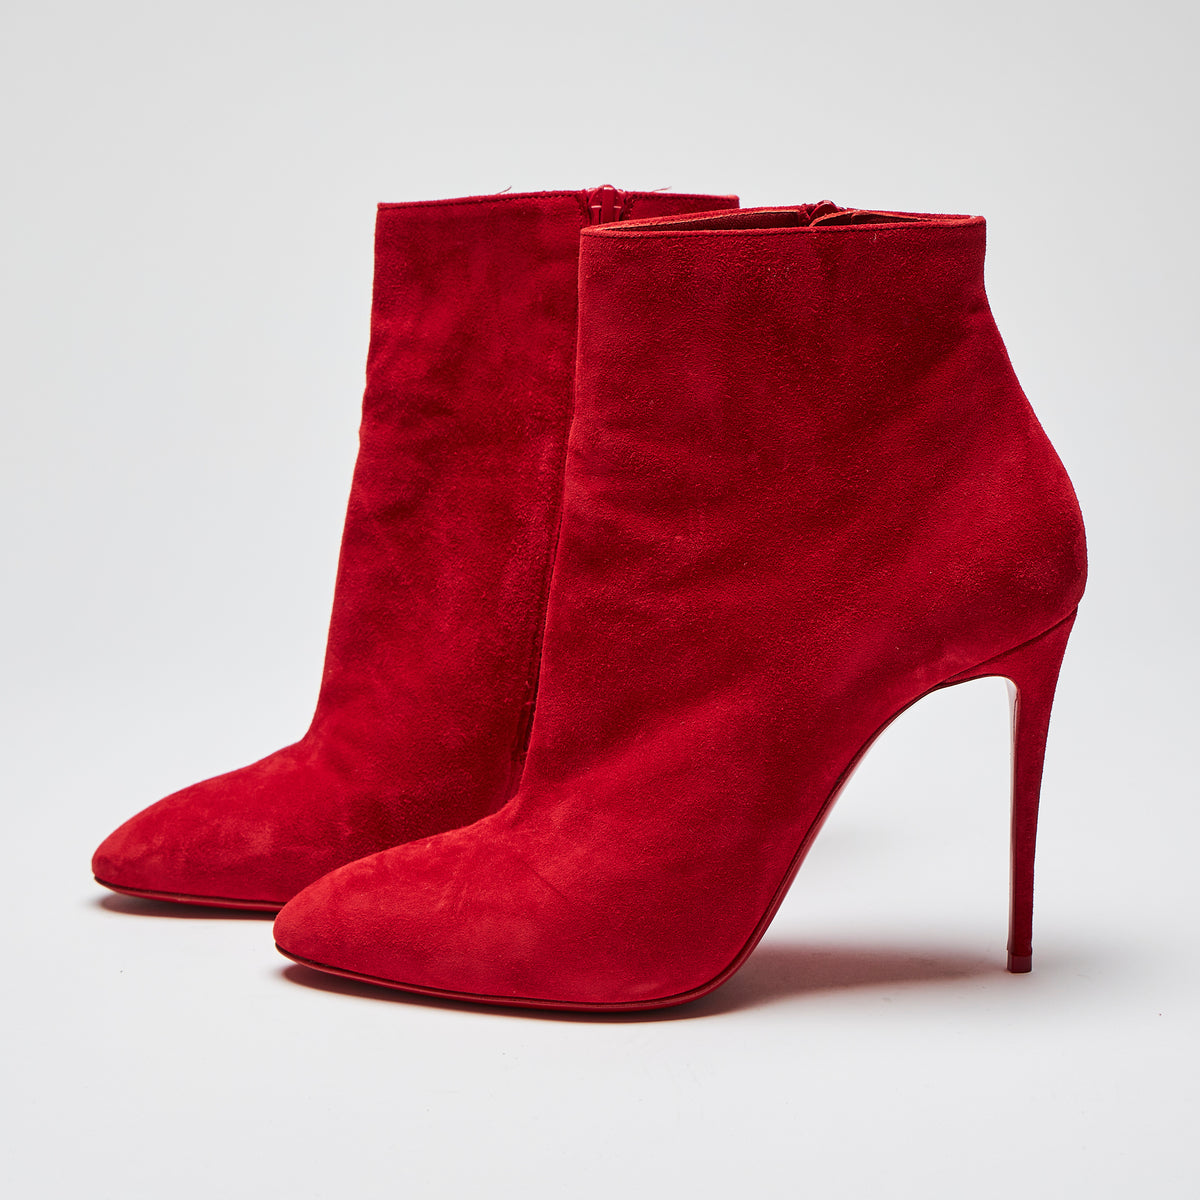 Pre-Loved Red Suede Stiletto Heel Ankle Boots with Side Zip.  (side)